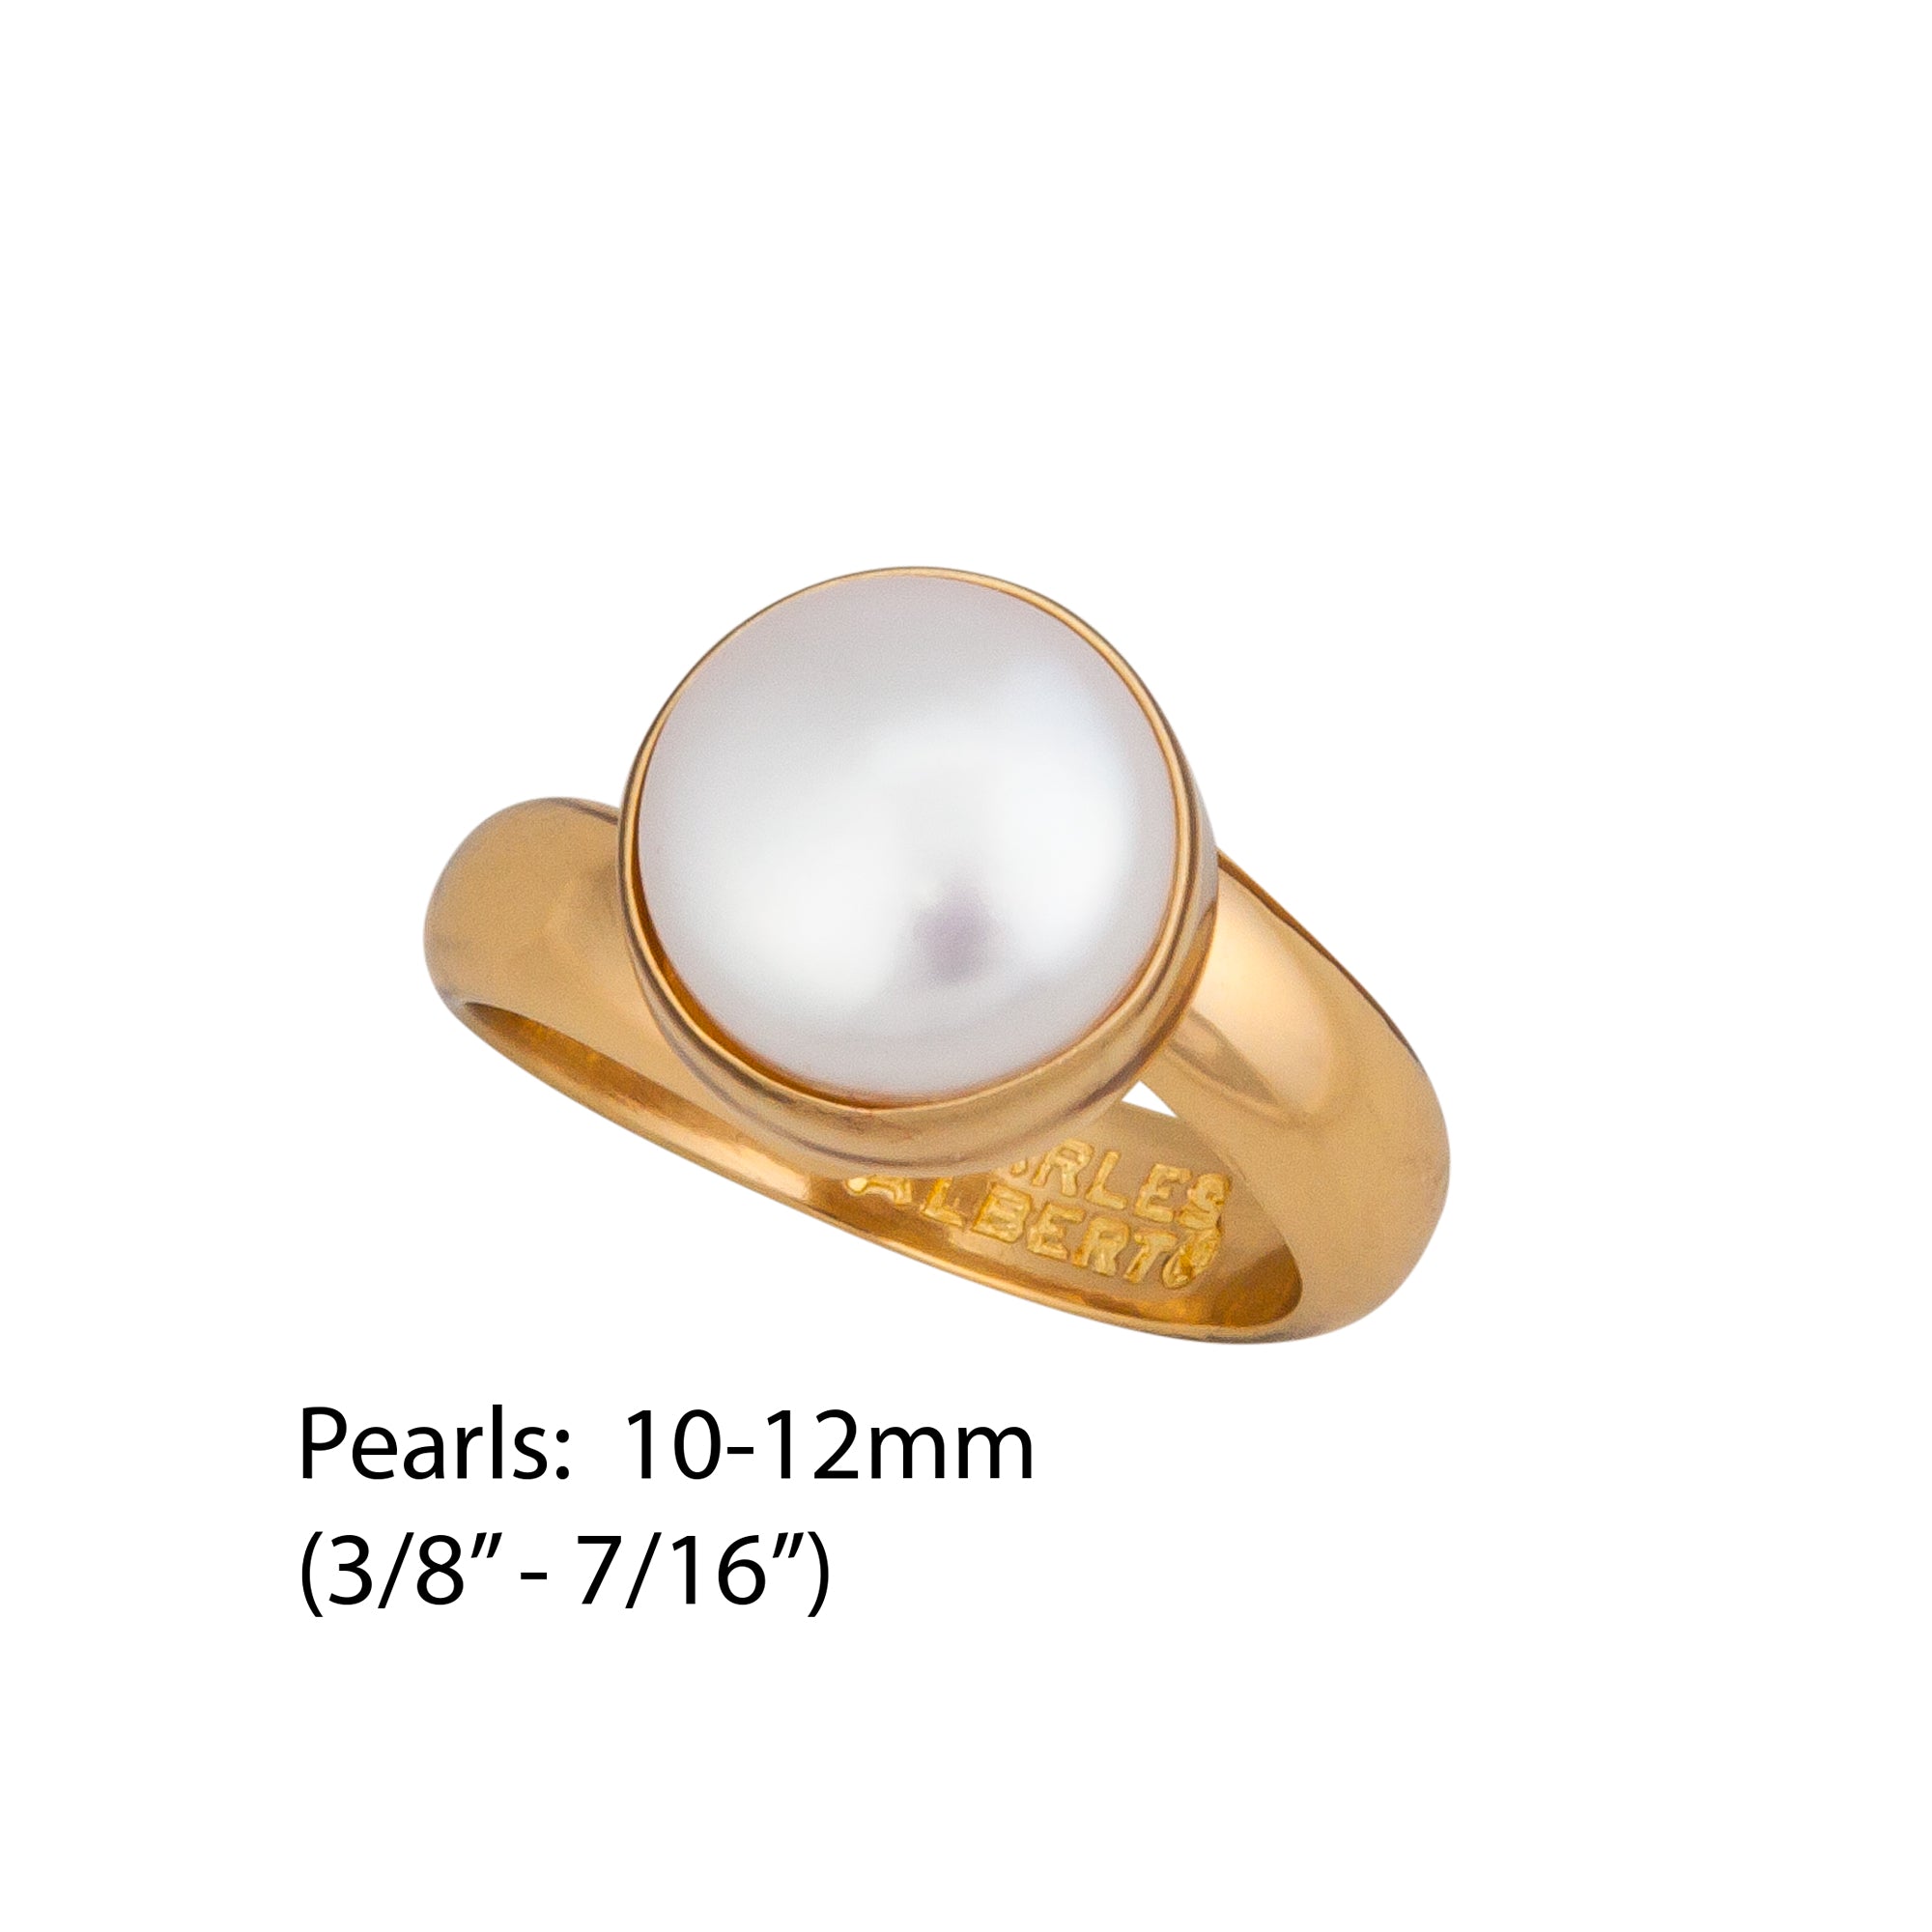 YELLOW GOLD AKOYA PEARL RING 001-300-00067 - Pearl Rings | Parkers' Karat  Patch | Asheville, NC